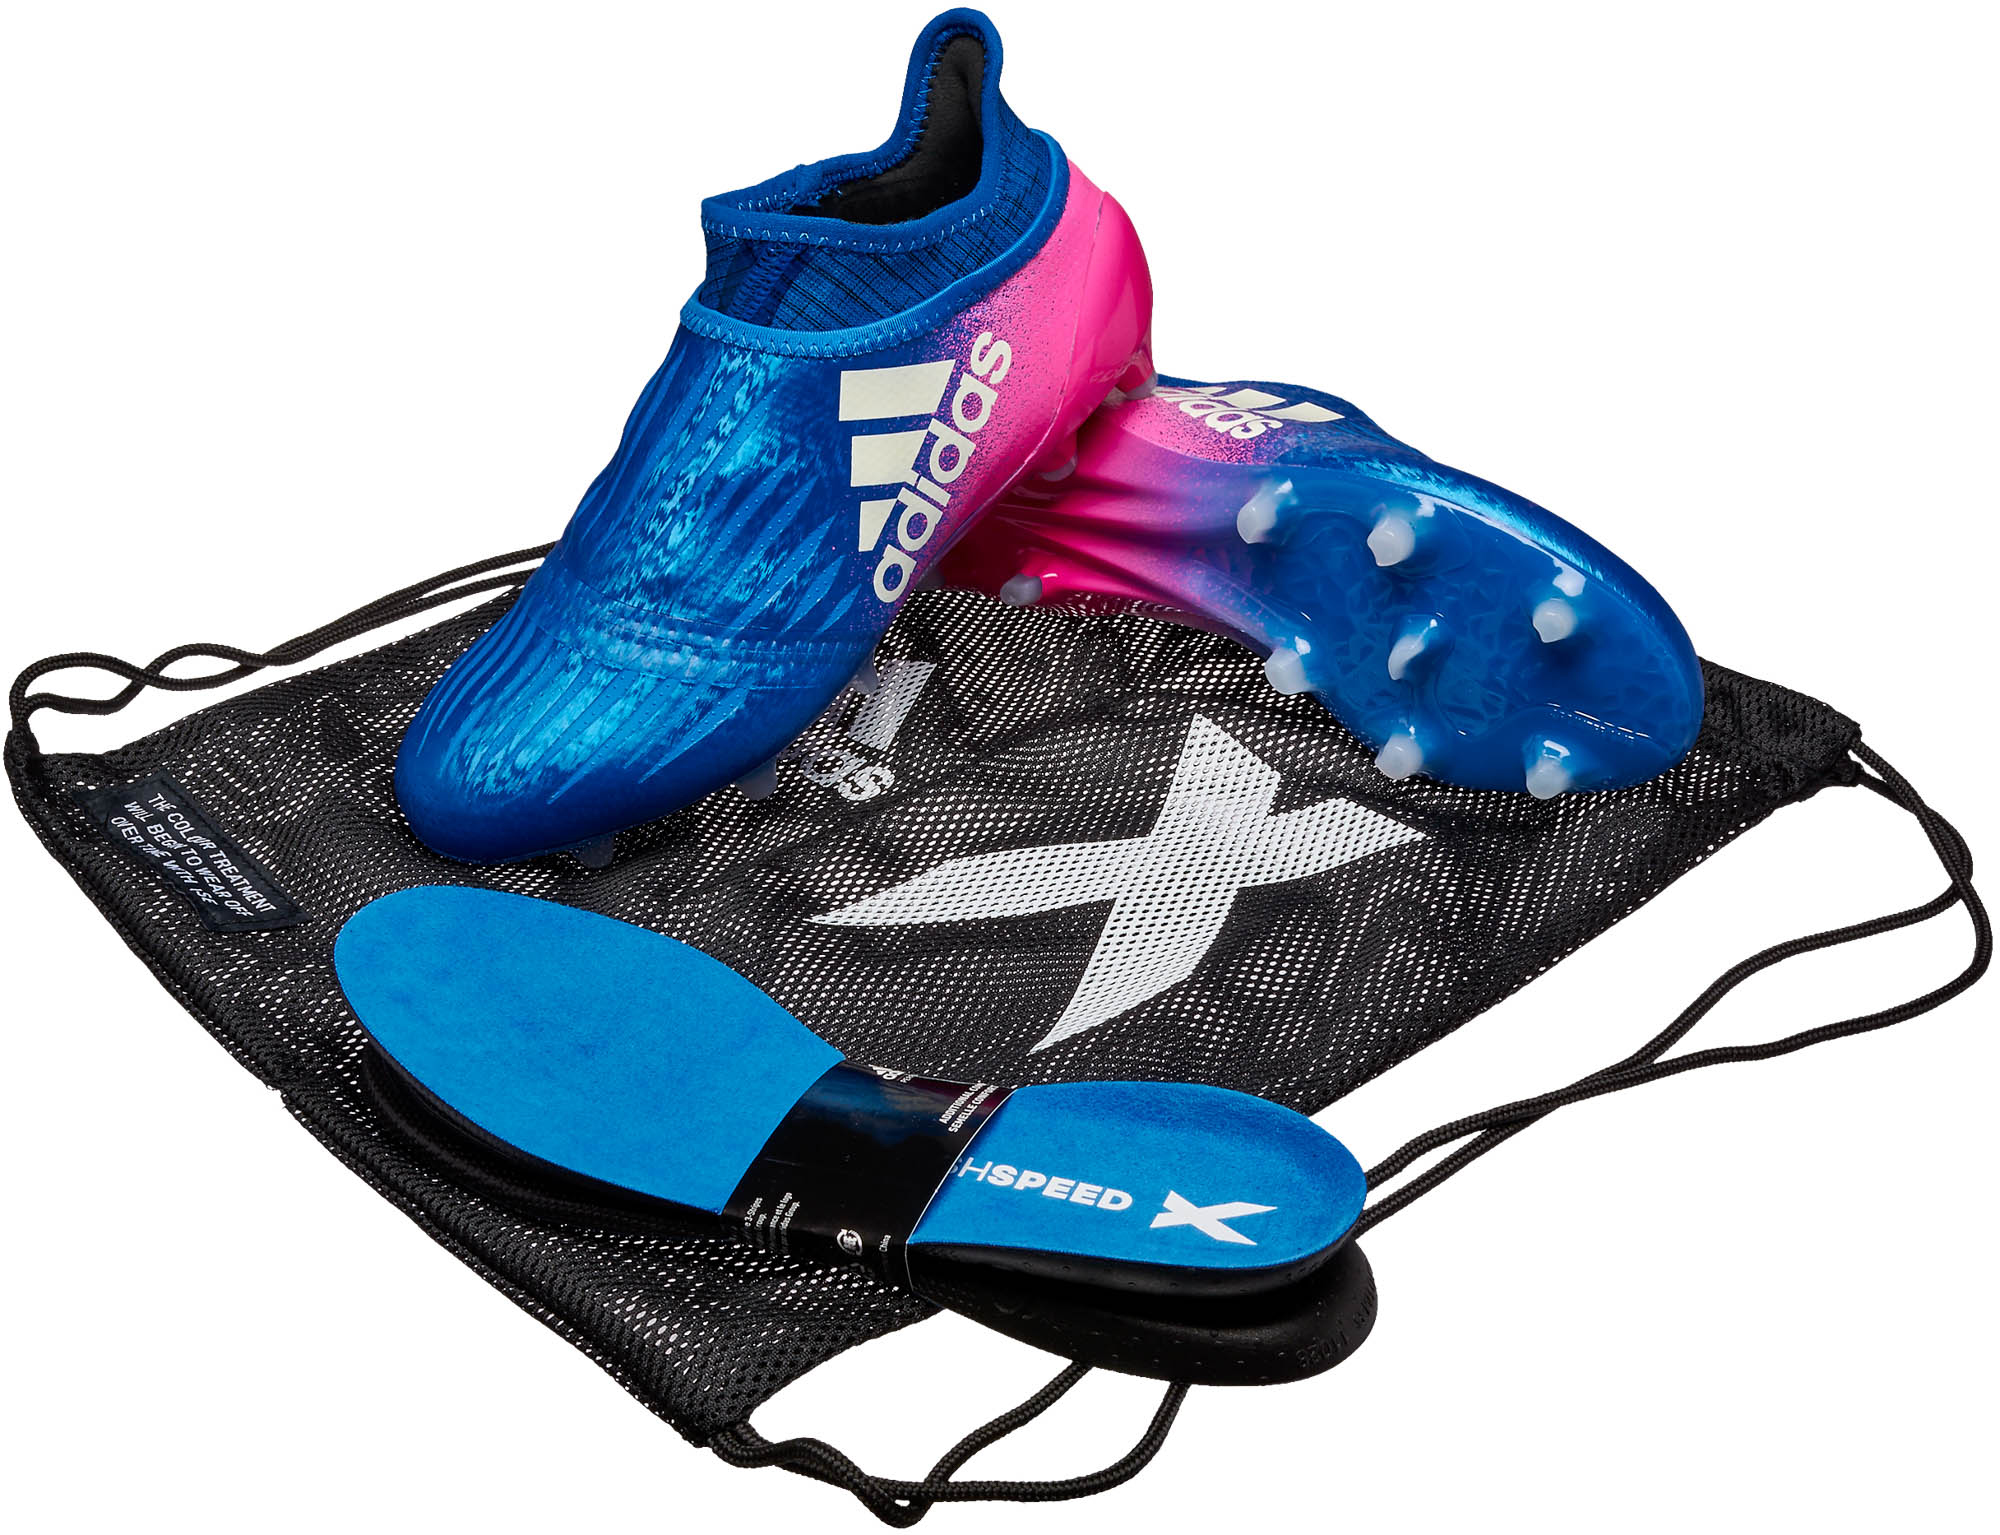 adidas x 16 purechaos blue and pink